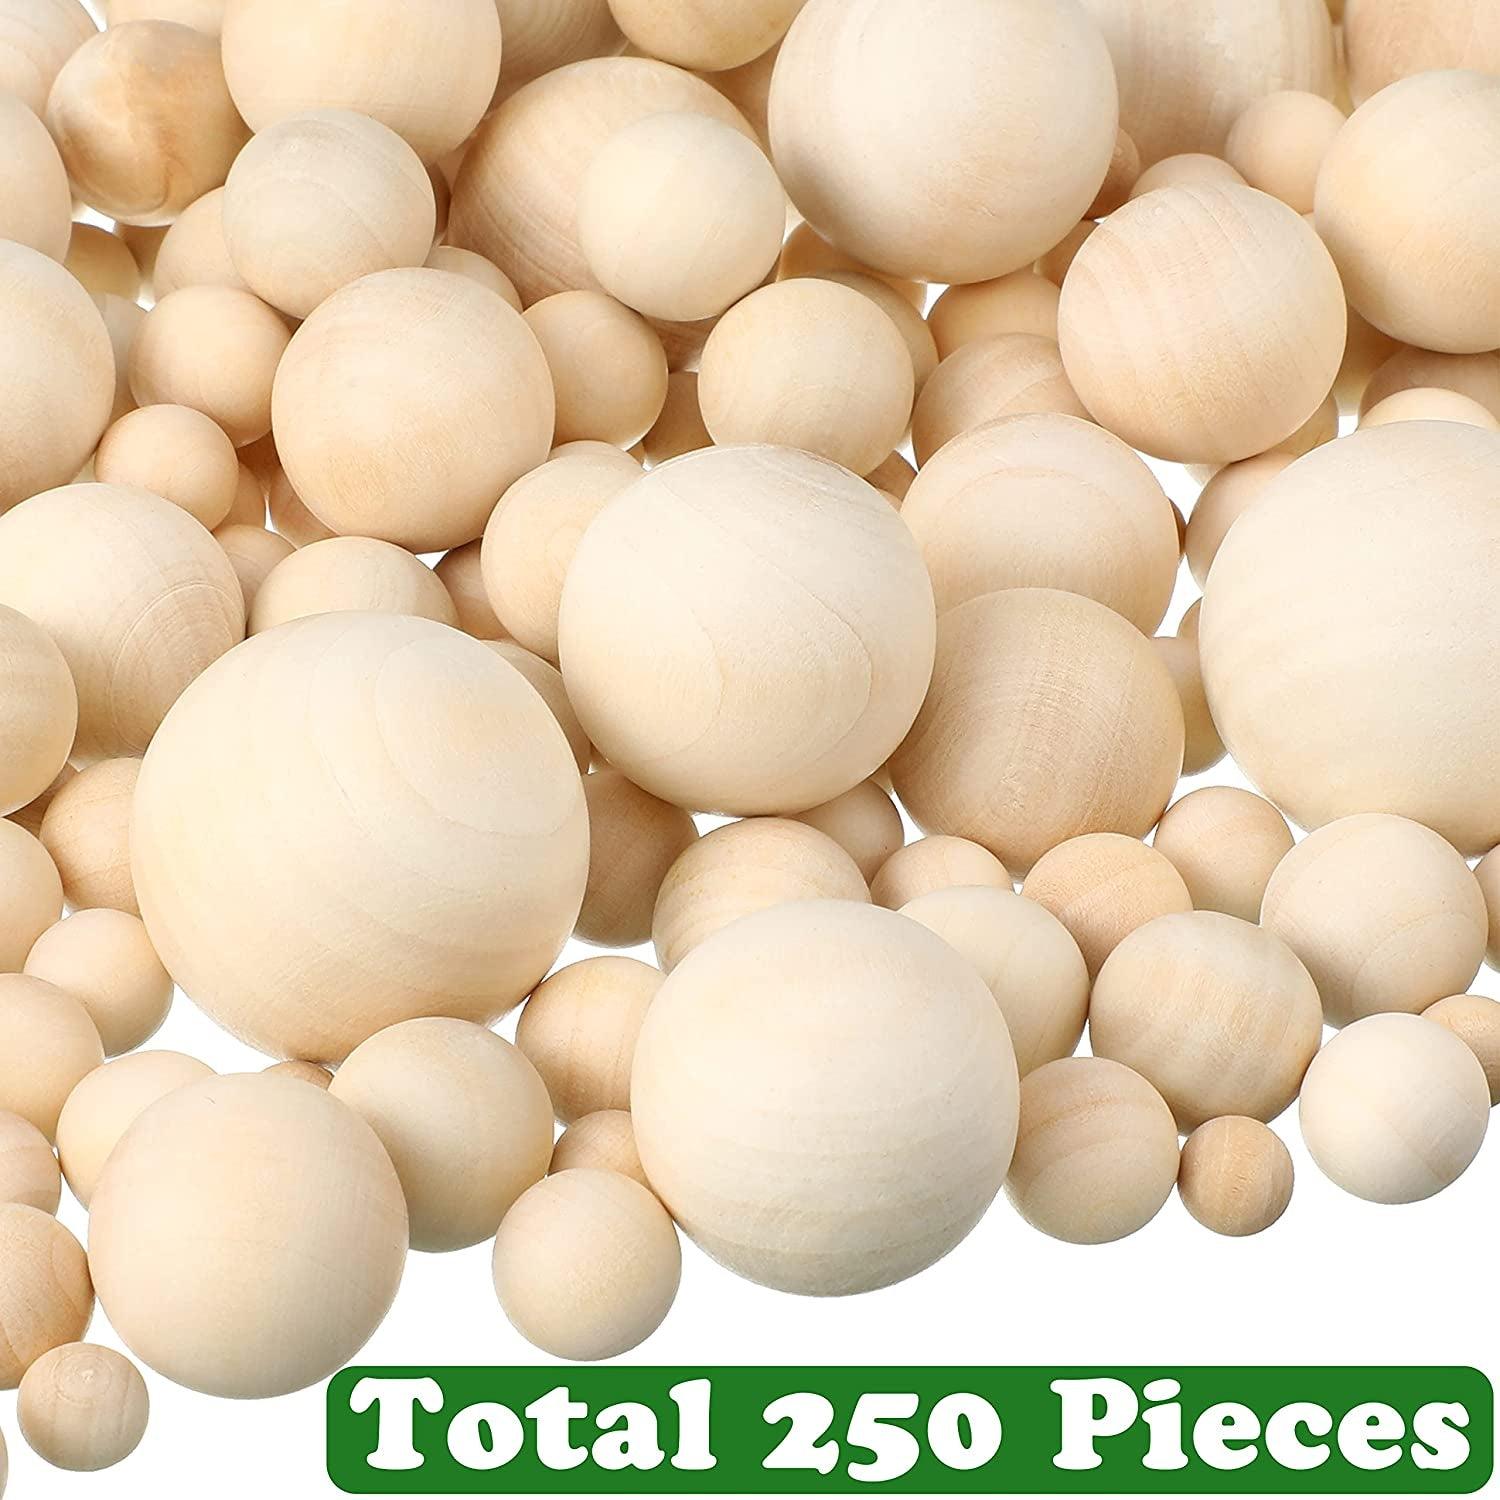 88 Pieces Wood Ball Wood Craft Balls Unfinished round Wooden Balls for DIY  Craft Projects Jewelry Making Art Design in 5 Sizes